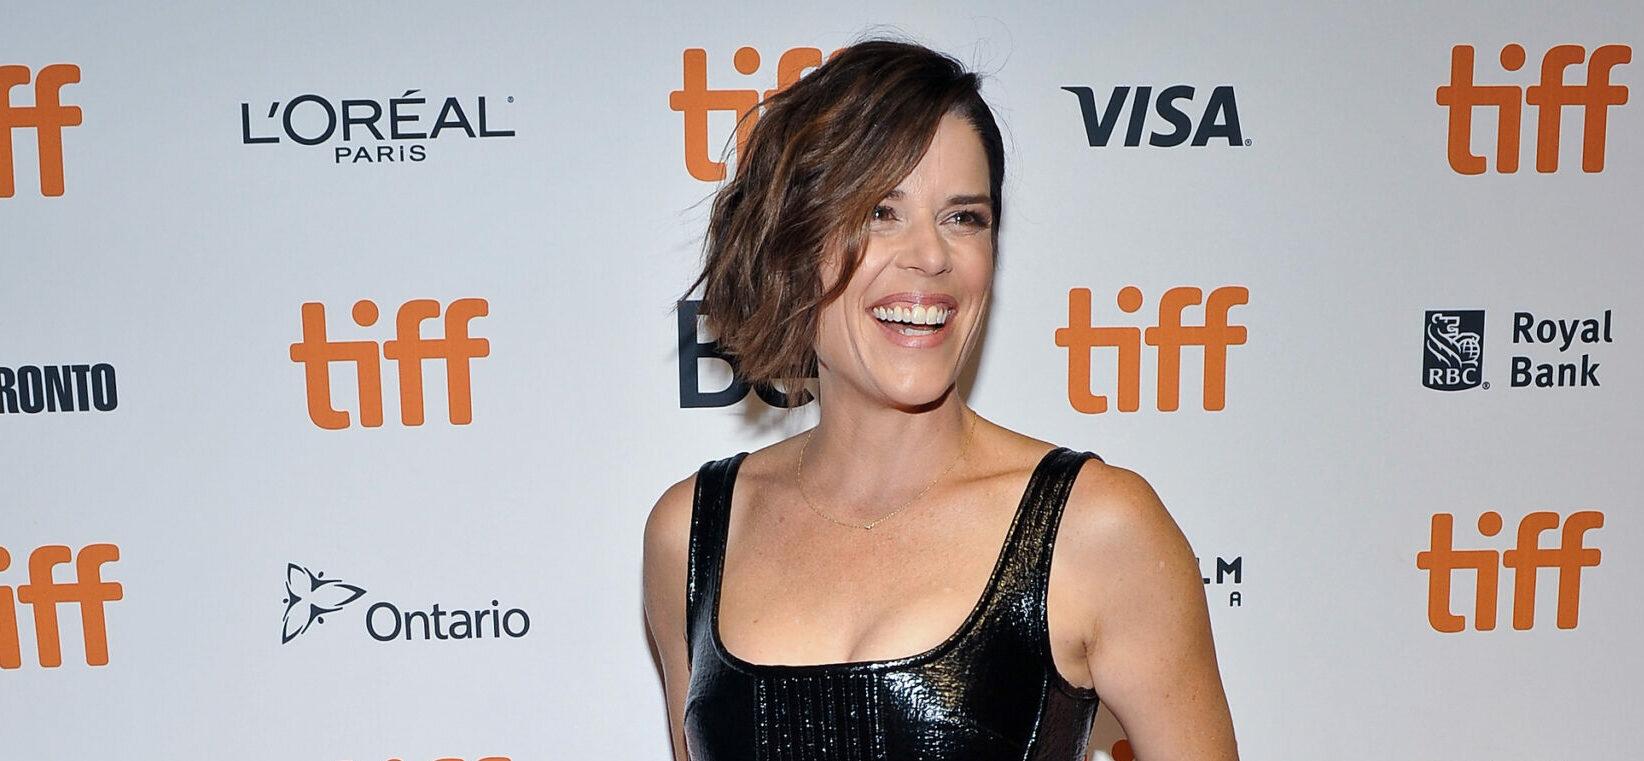 Neve Campbell Welcome To Return To ‘Scream’ Franchise, Says Screenwriter: ‘Door Is Wide Open’